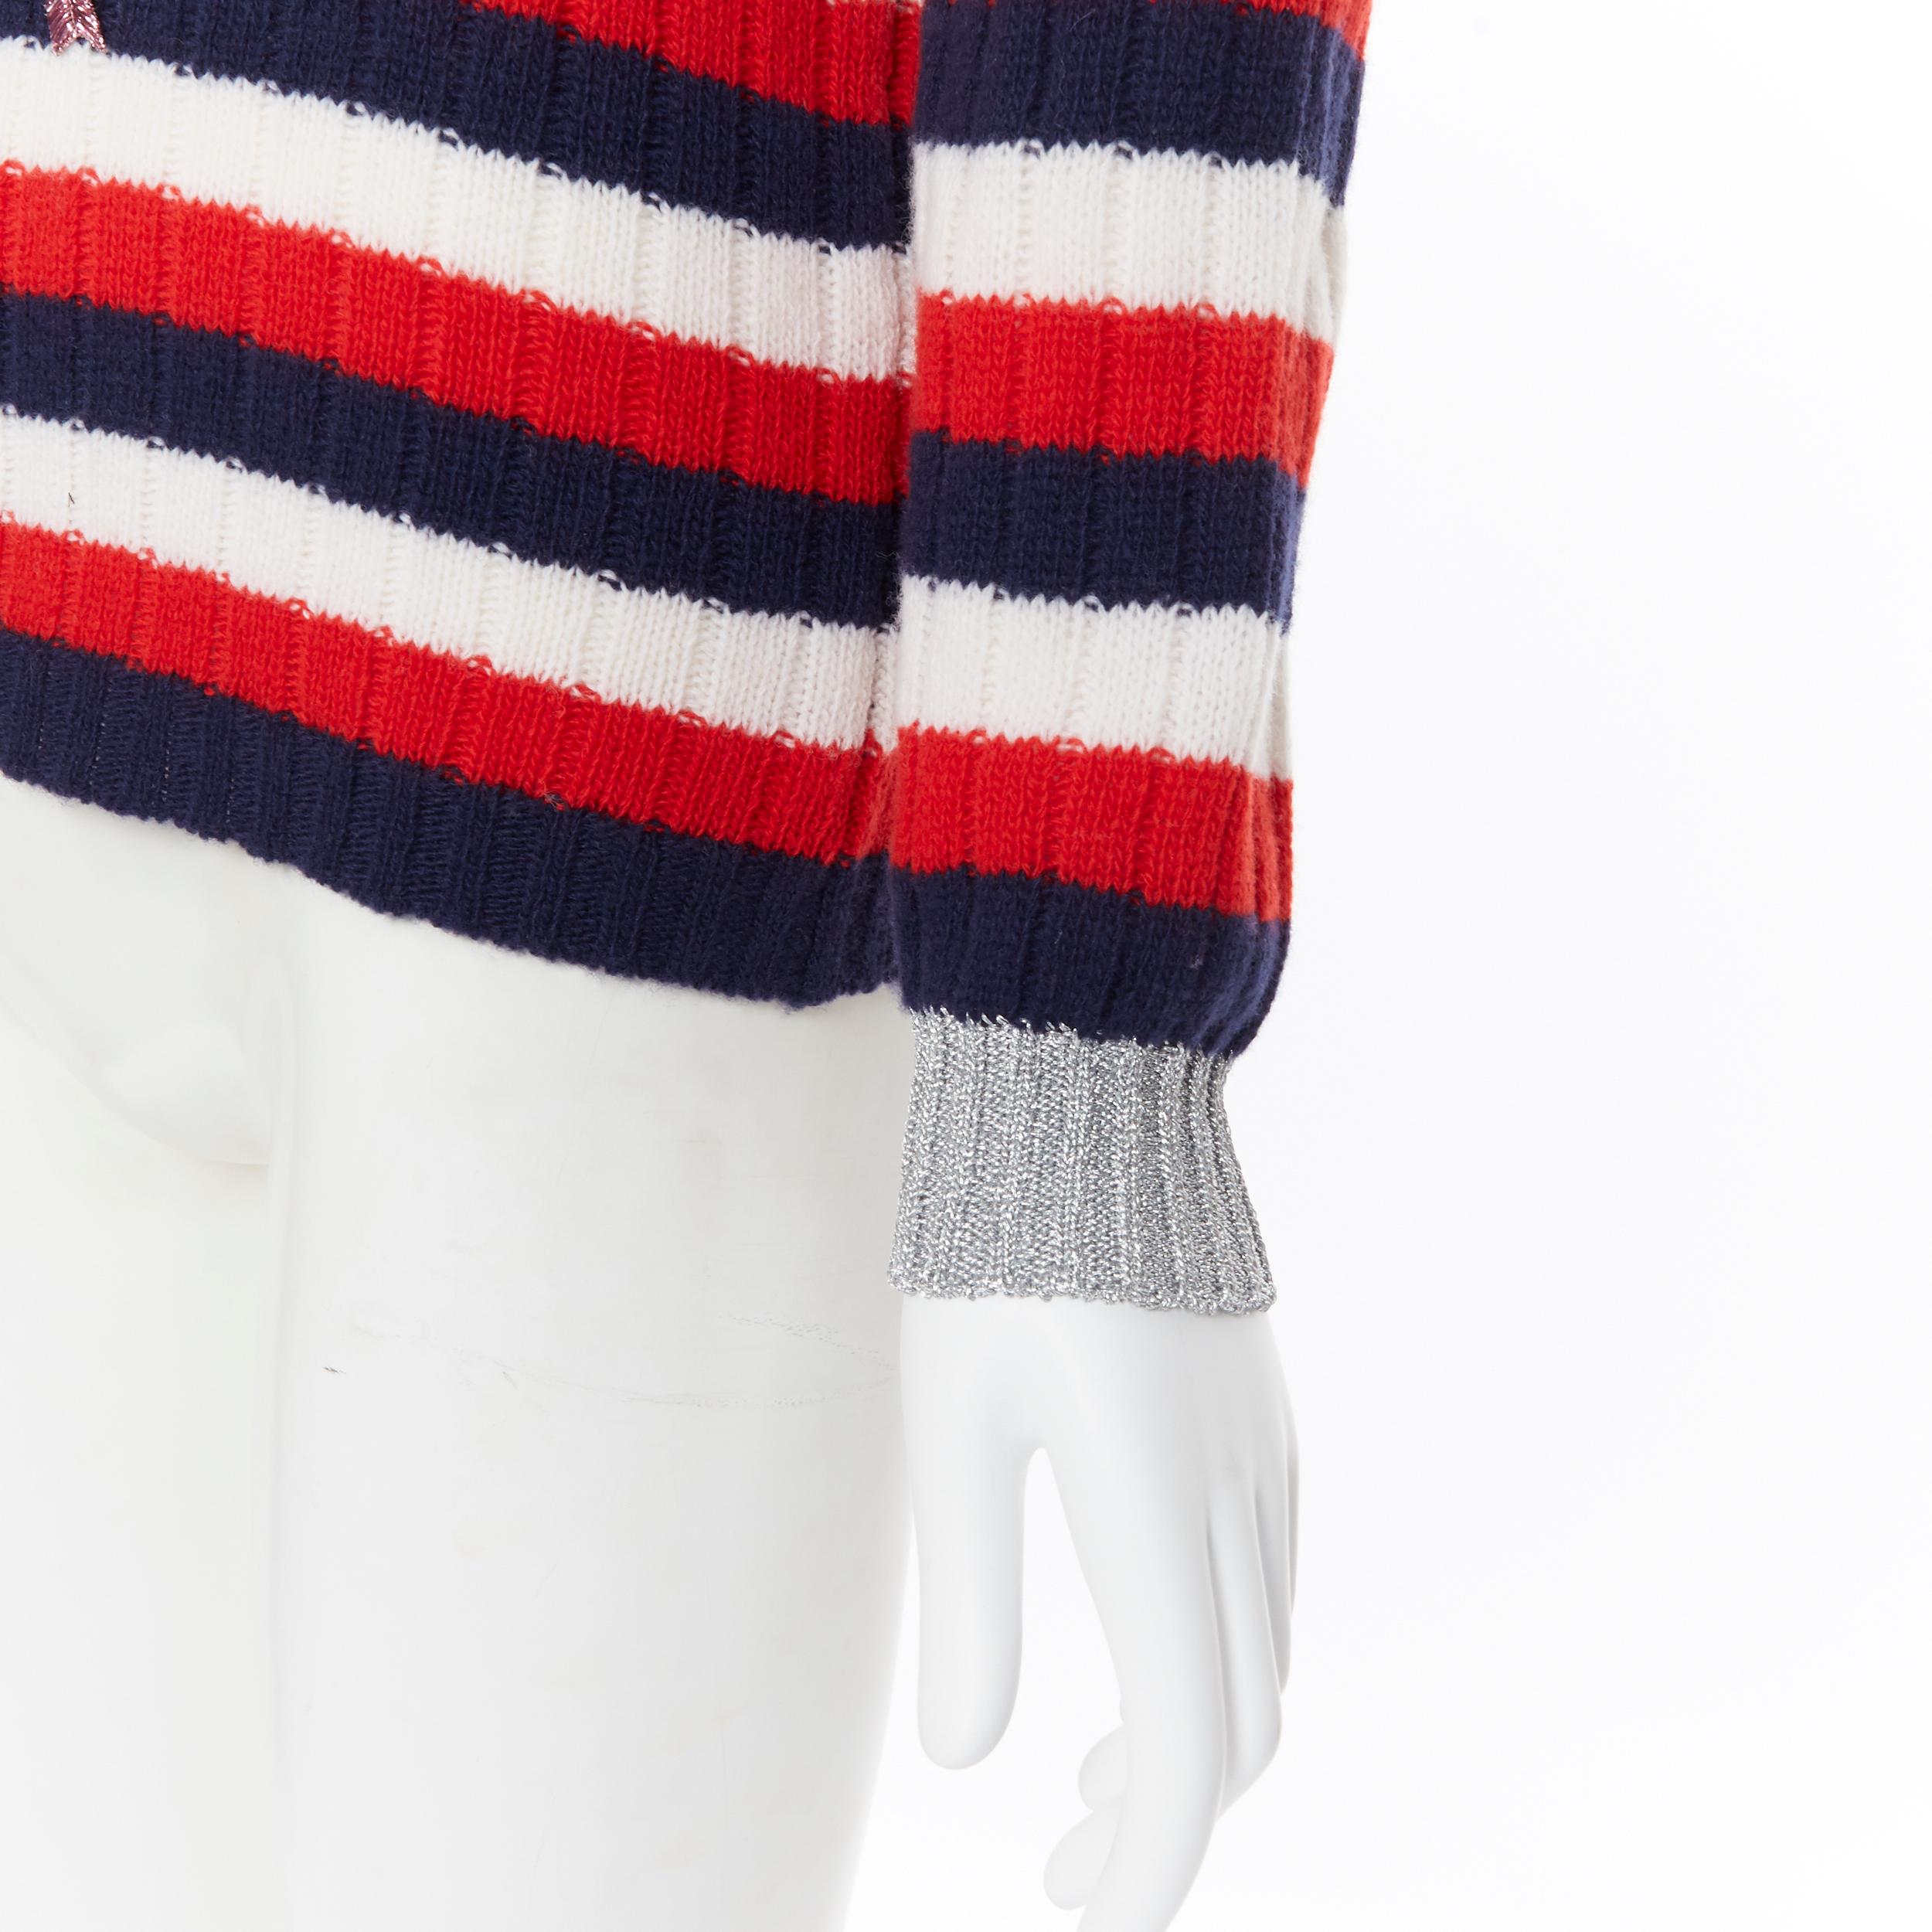 GUCCI MICHELE 100% wool red blue white striped UFO sequins embellished sweater M 1